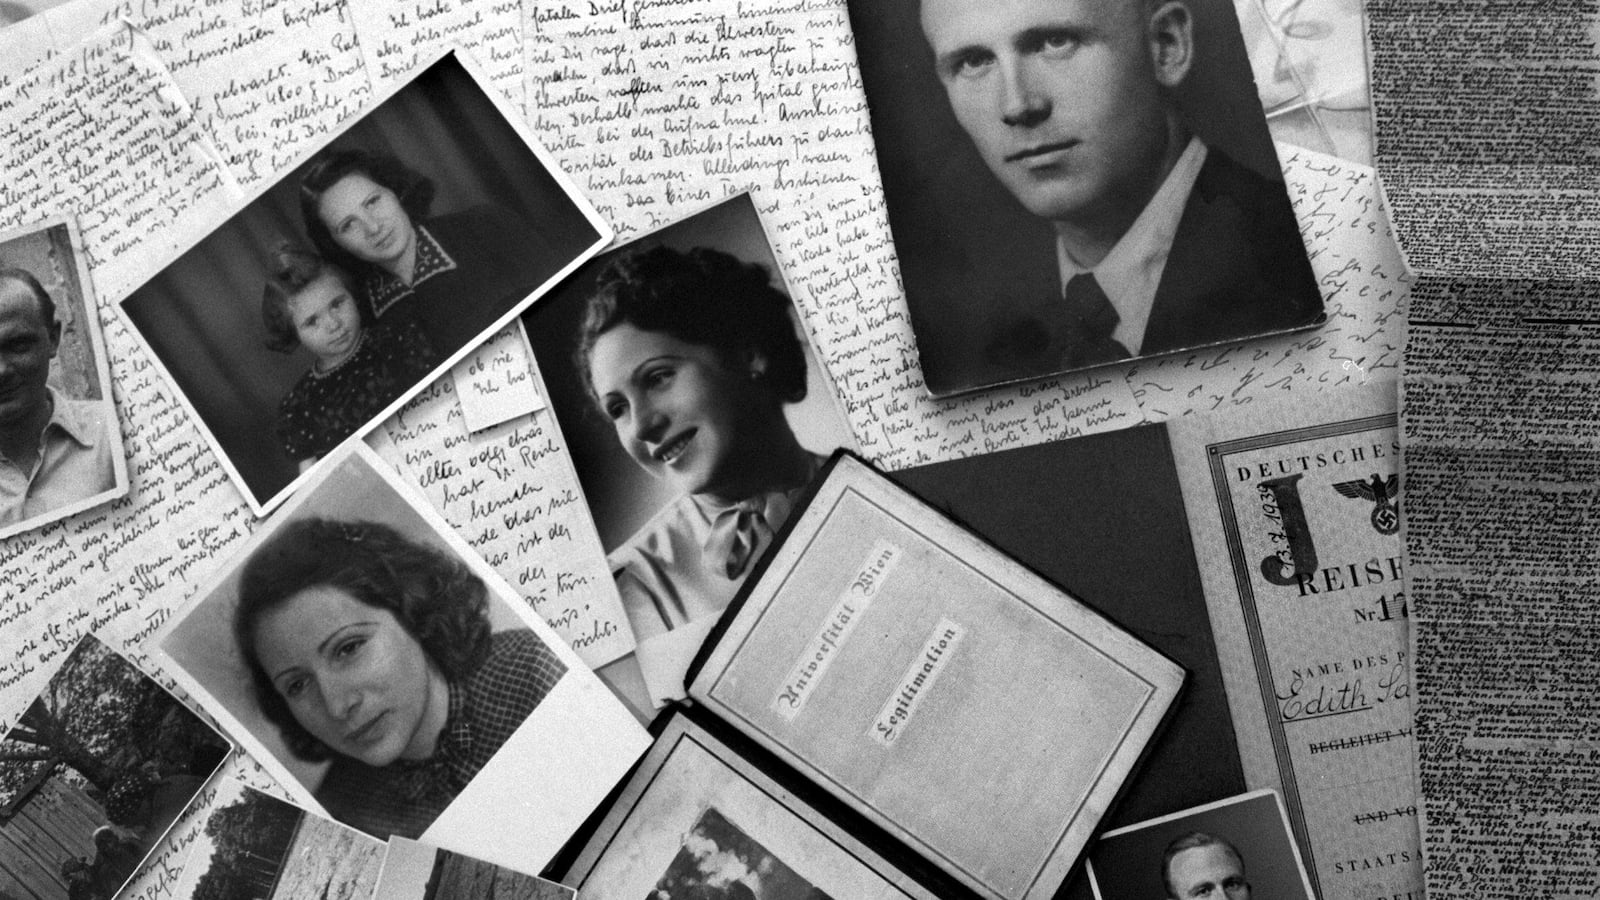 Photo depicts black and white family photographs scattered over hand-written letters and journals.